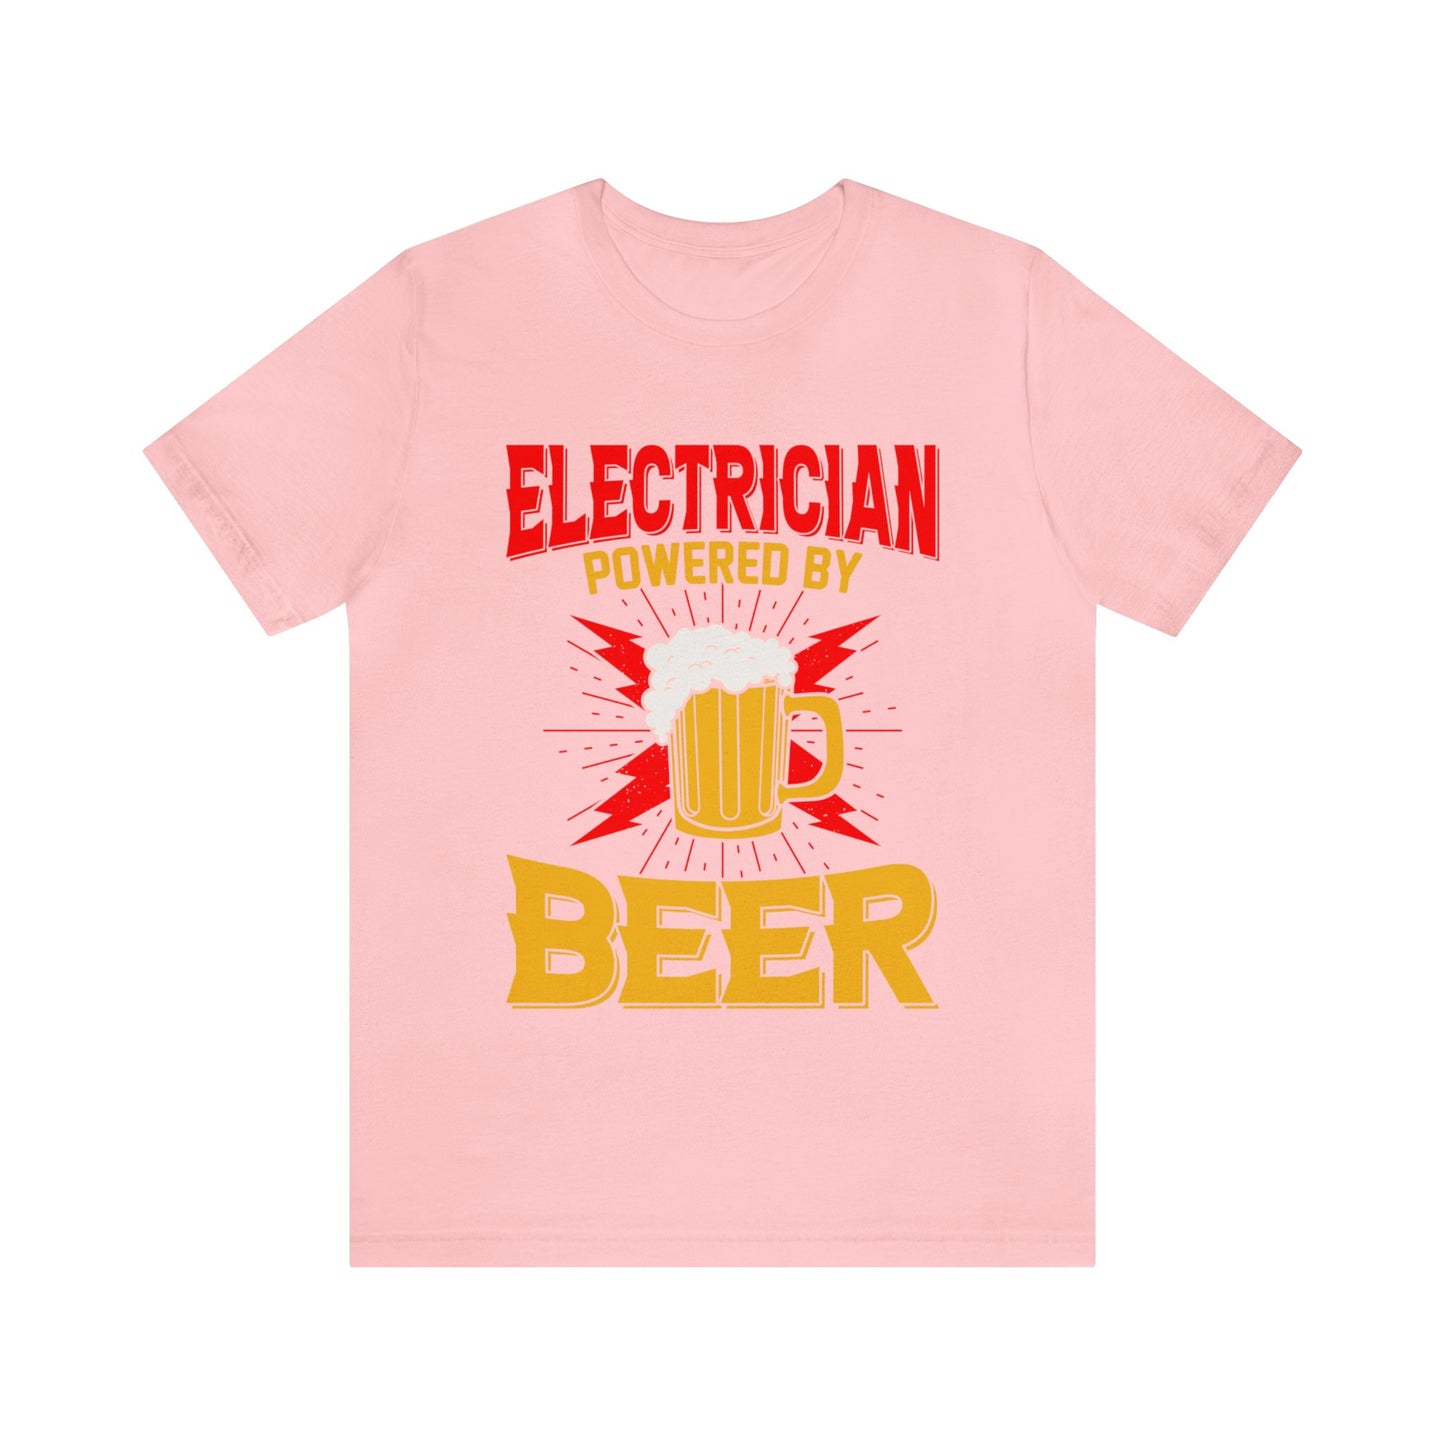 Electrician Powered by Beer Shirt for Men, Electrician Shirt for Fathers Day, Funny Shirt for Electrician Gift for Husband, T865